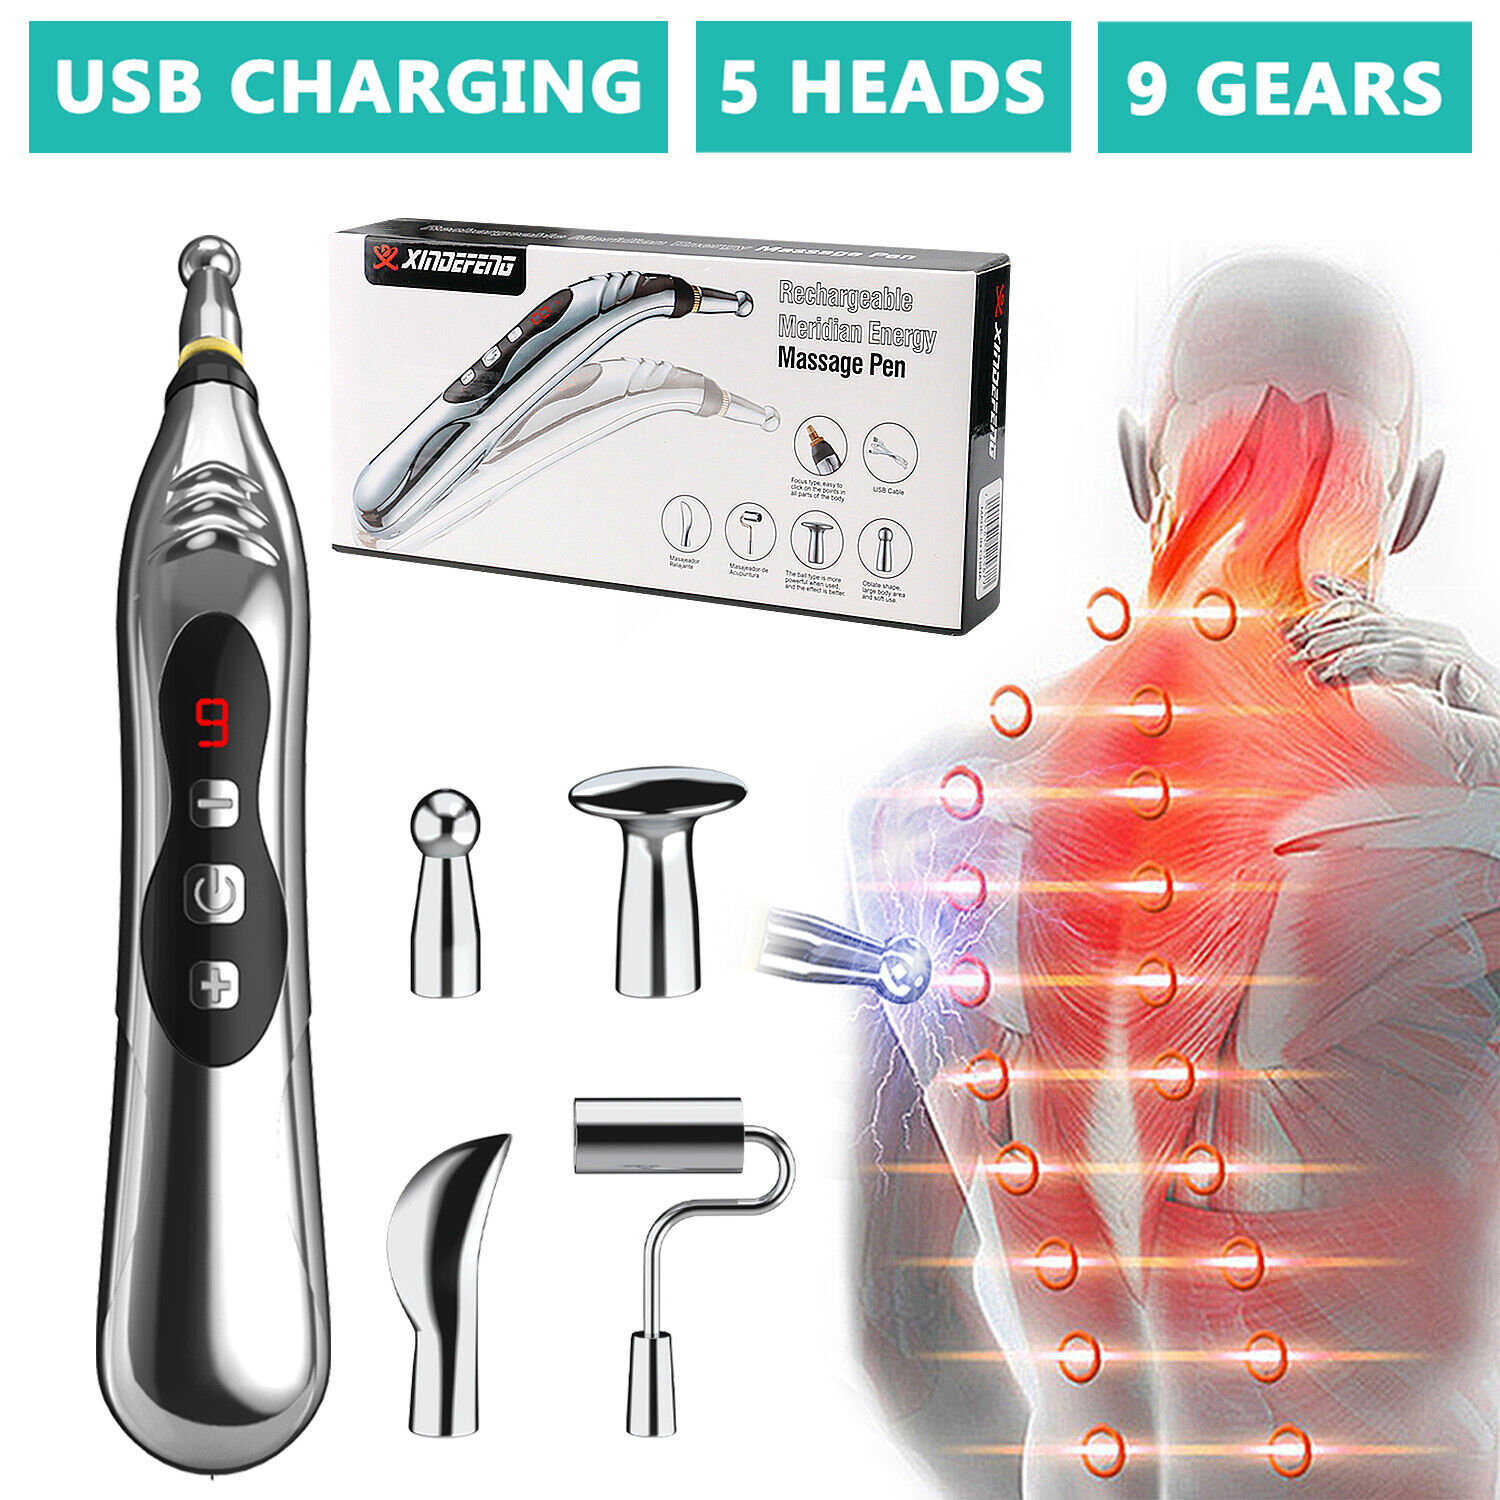 shop 5Heads Limited time sale USB Electronic Acupuncture Pen Meridian Heal Energy Body